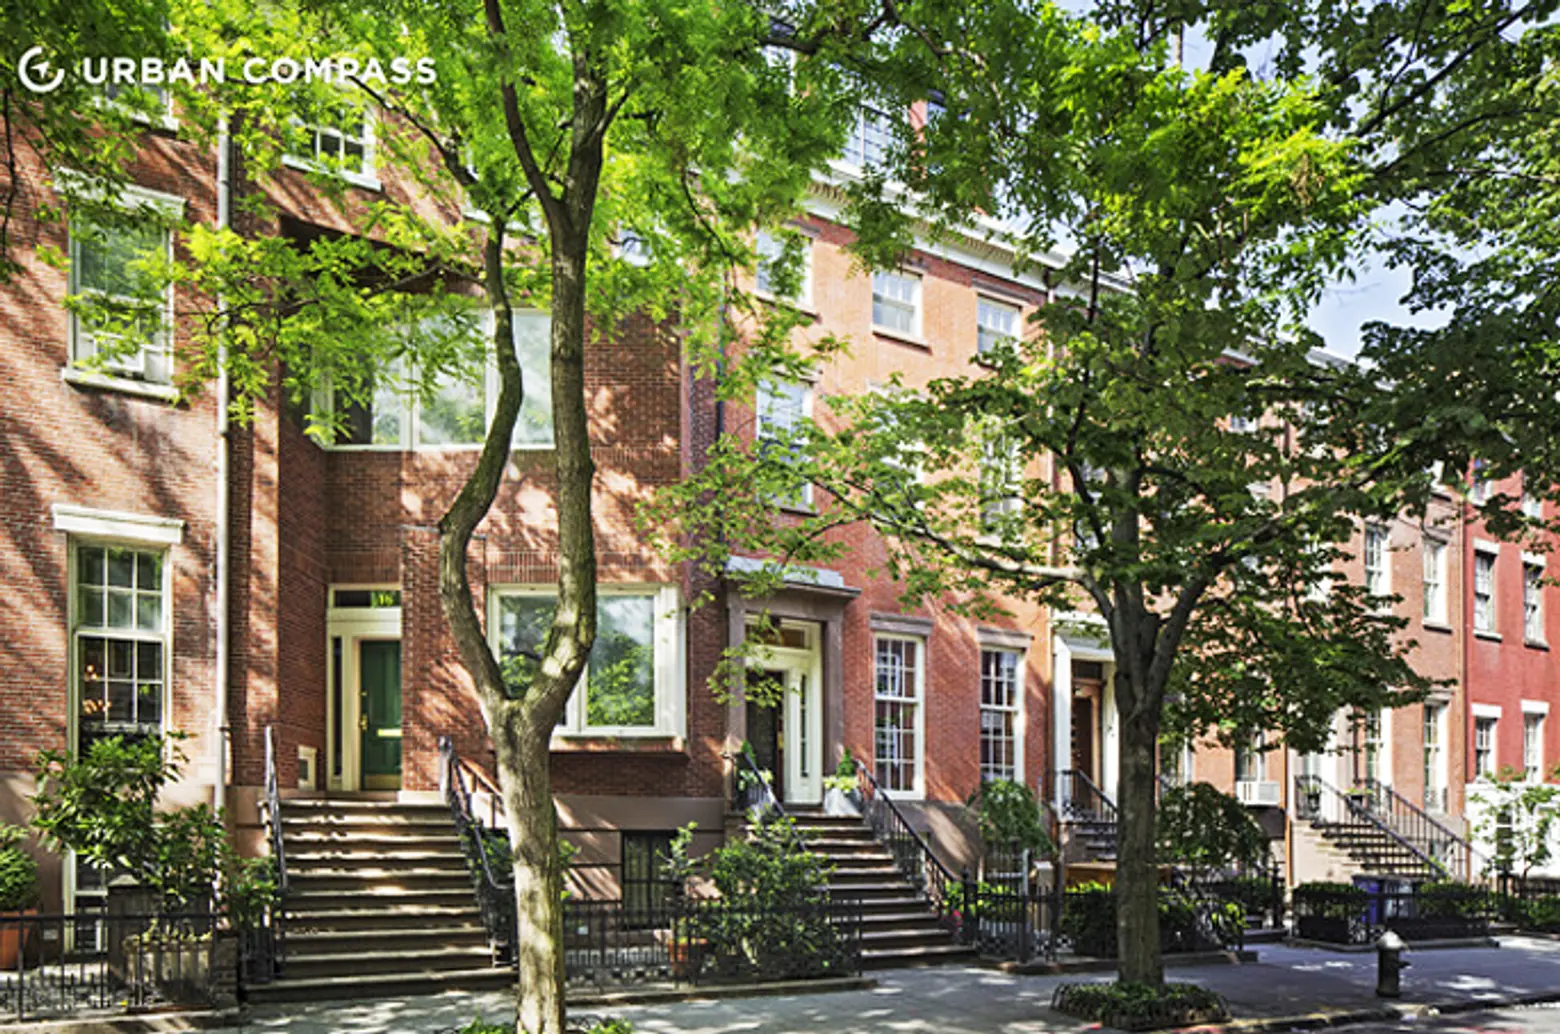 Infamous Greenwich Townhouse with ‘Explosive’ Past for Sale Again, Now $13.5M